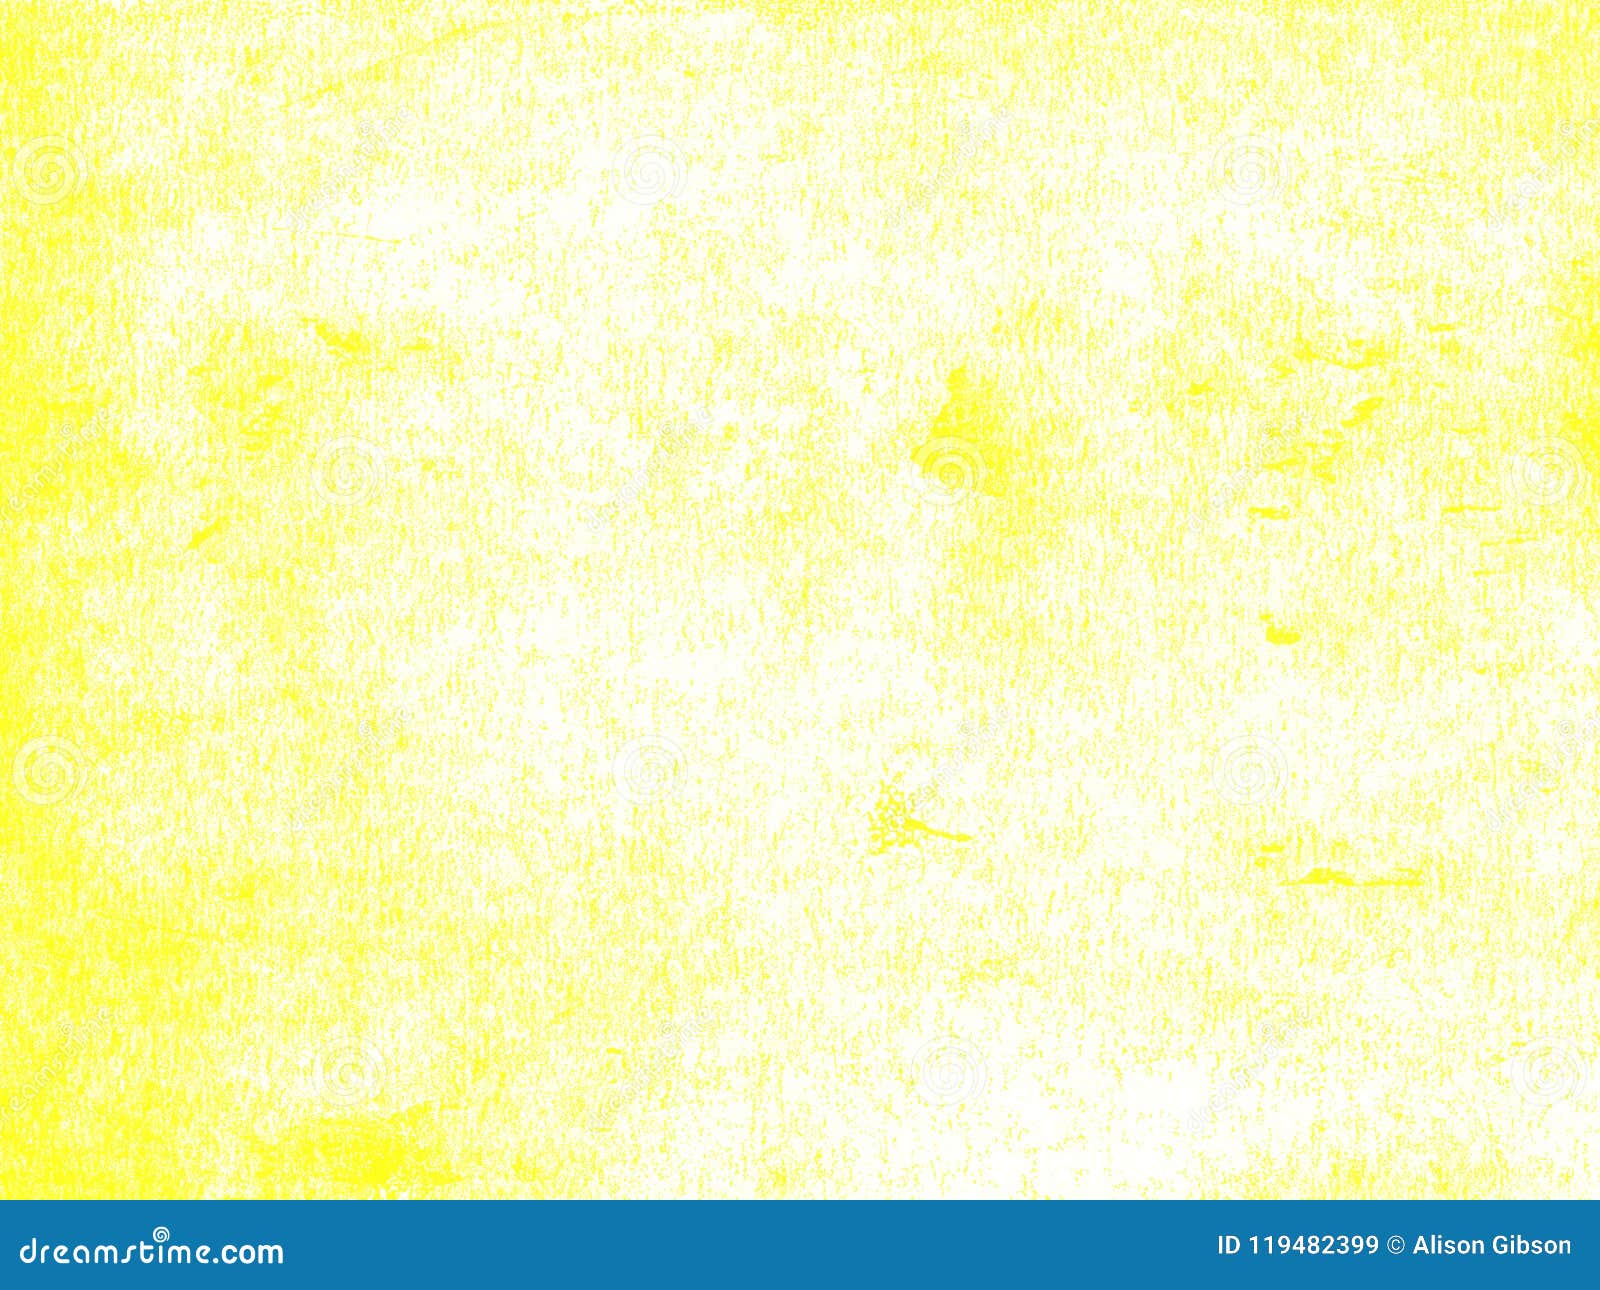 A Pale Yellow Lino Printed Texture Background Stock Illustration -  Illustration of printed, grunge: 119482399